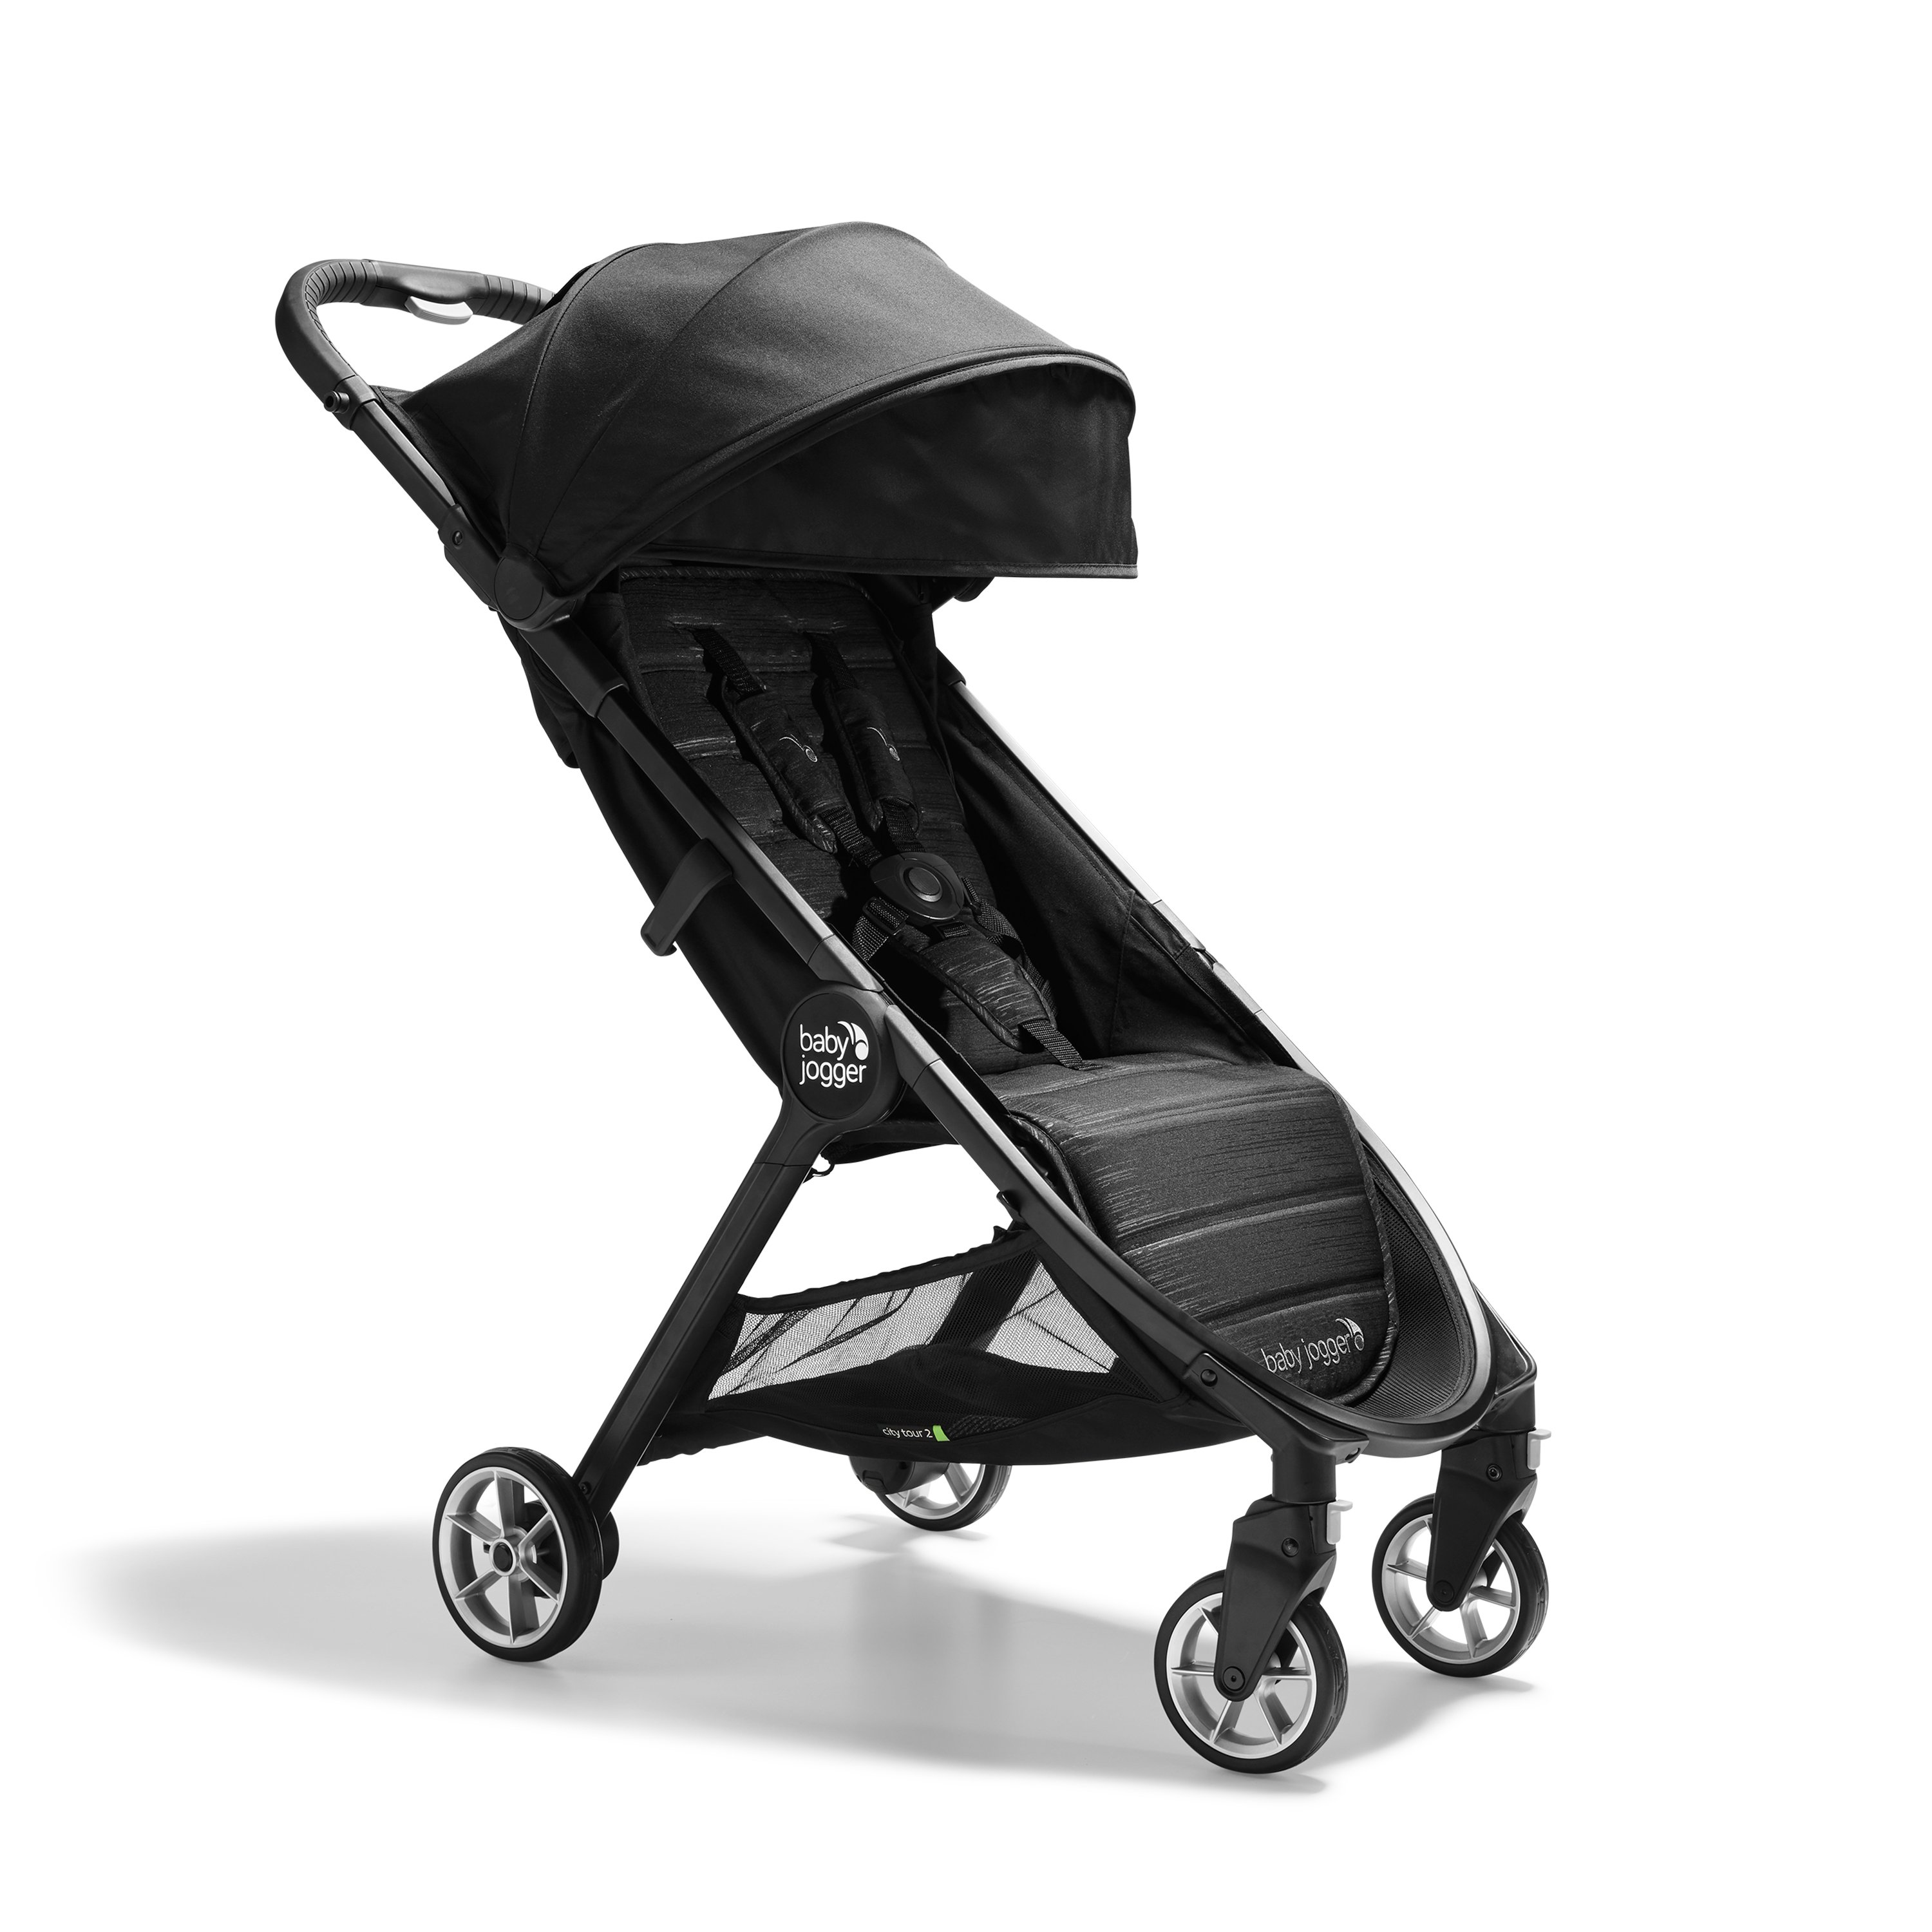 Baby Jogger City Tour Lux Lightweight Compact Travel Stroller Granite w/ Bag NEW 